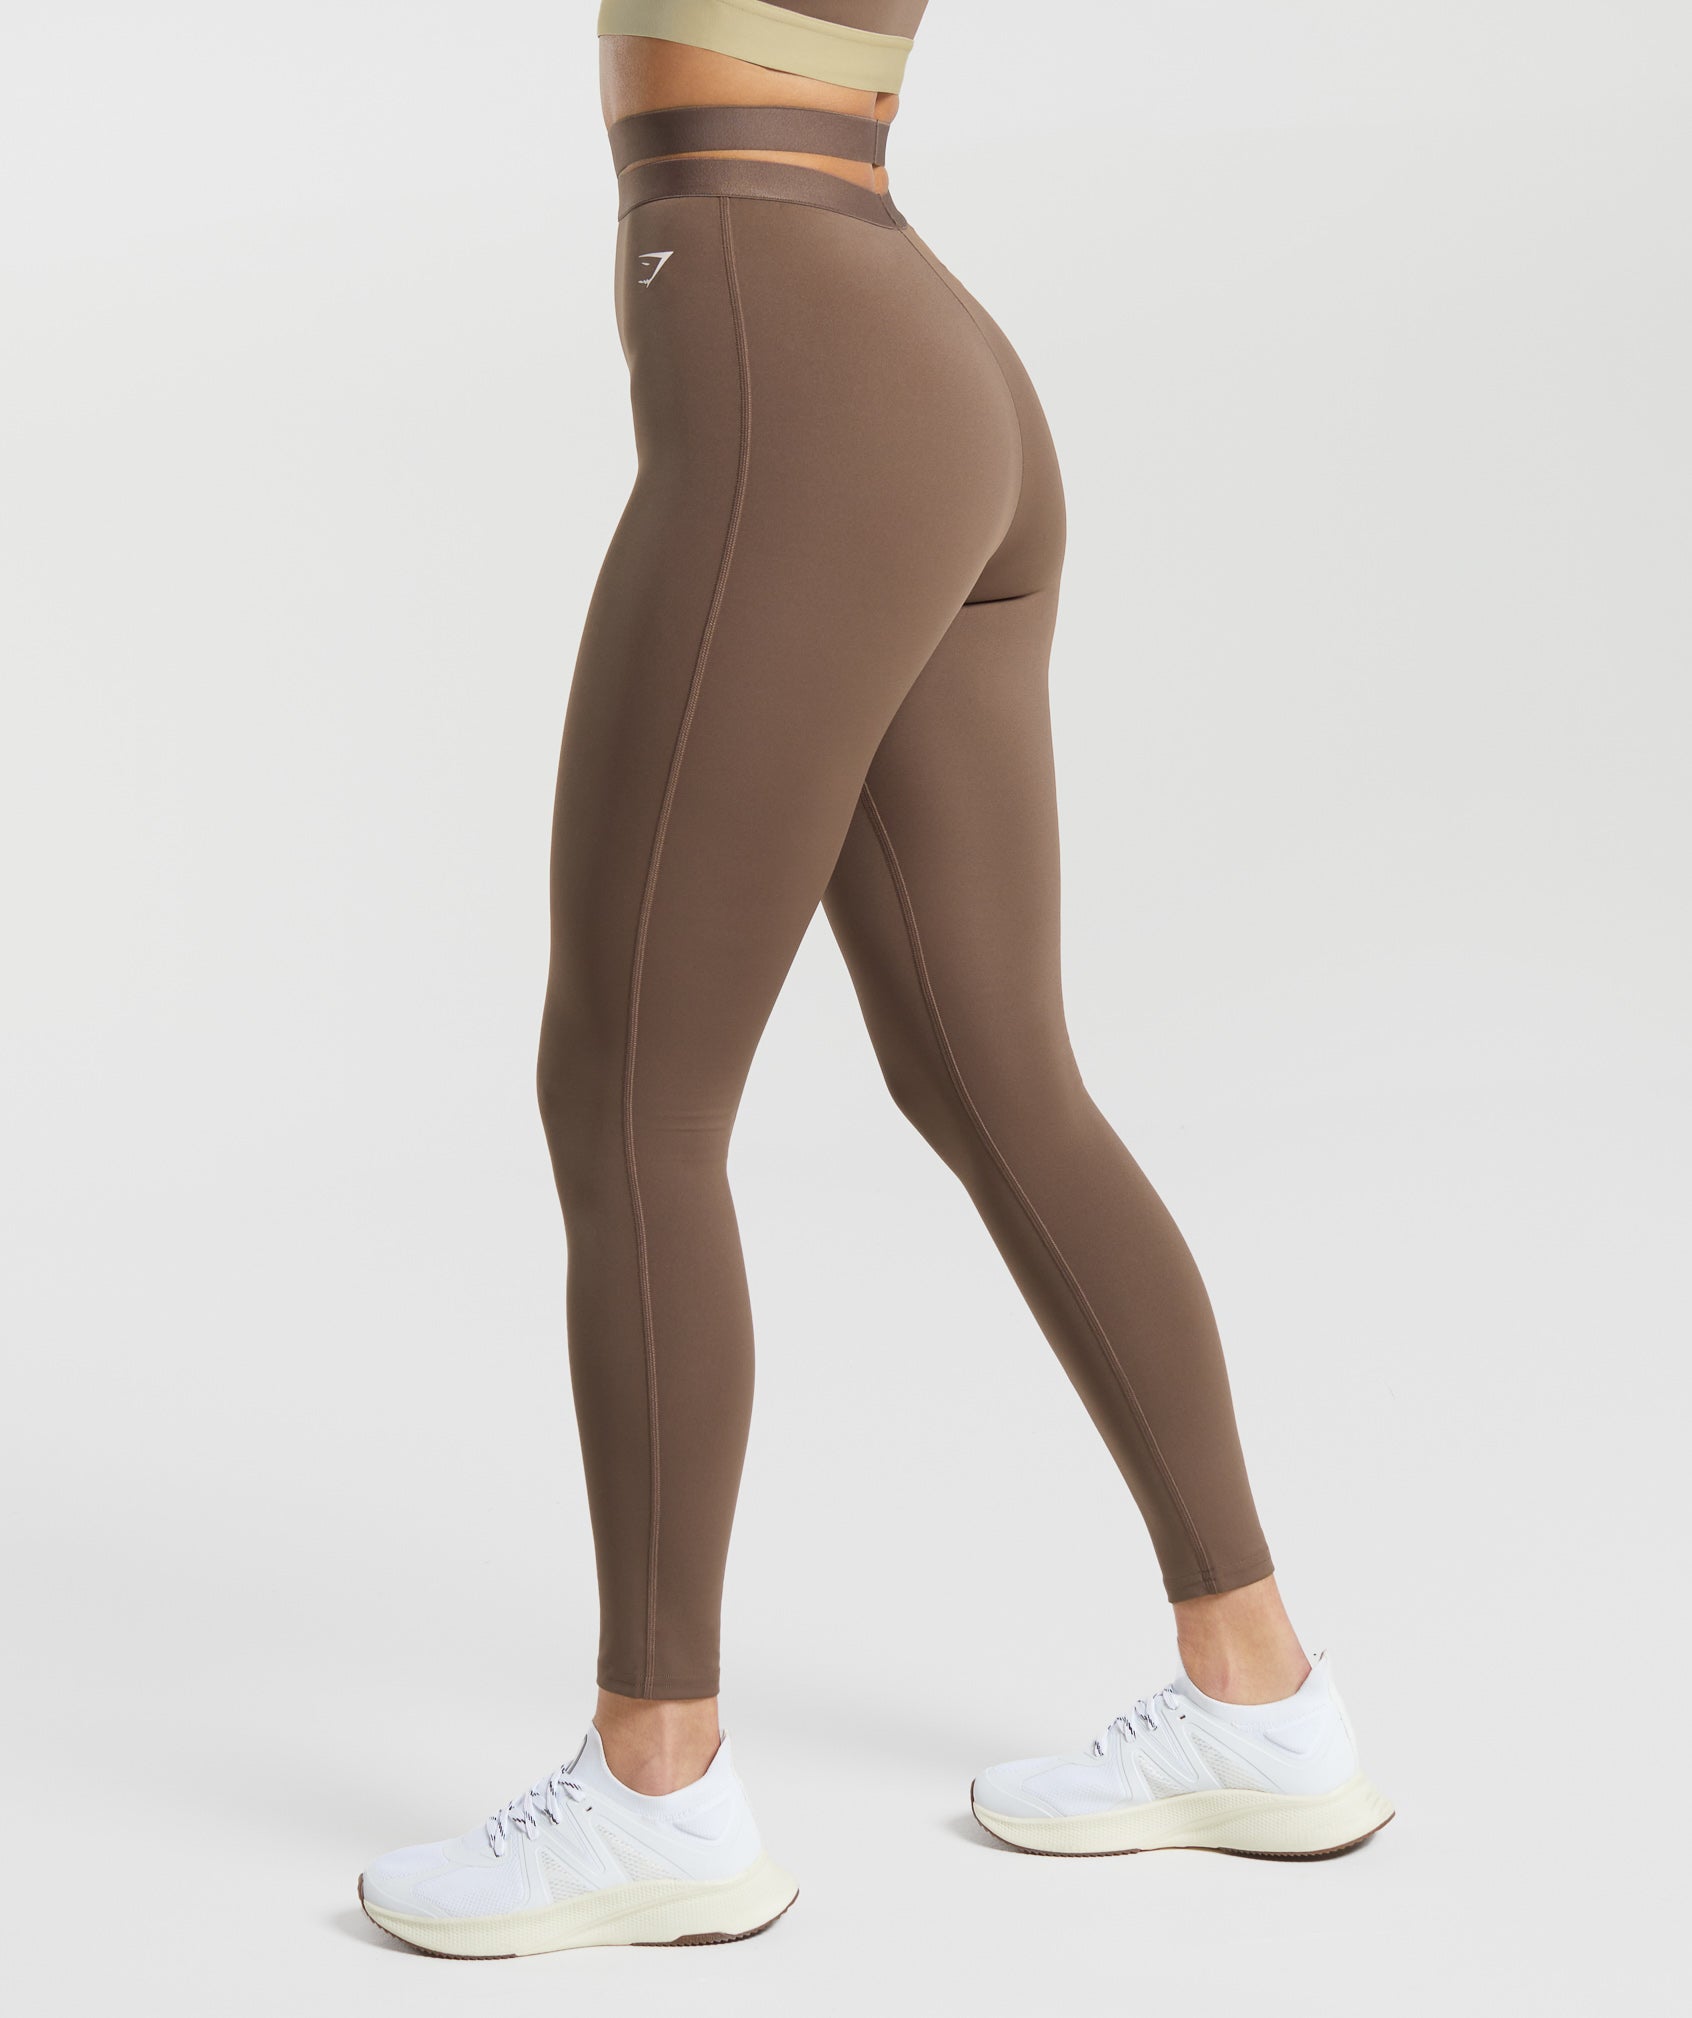 Gymshark Vision Legging (Small), Women's Fashion, Activewear on Carousell